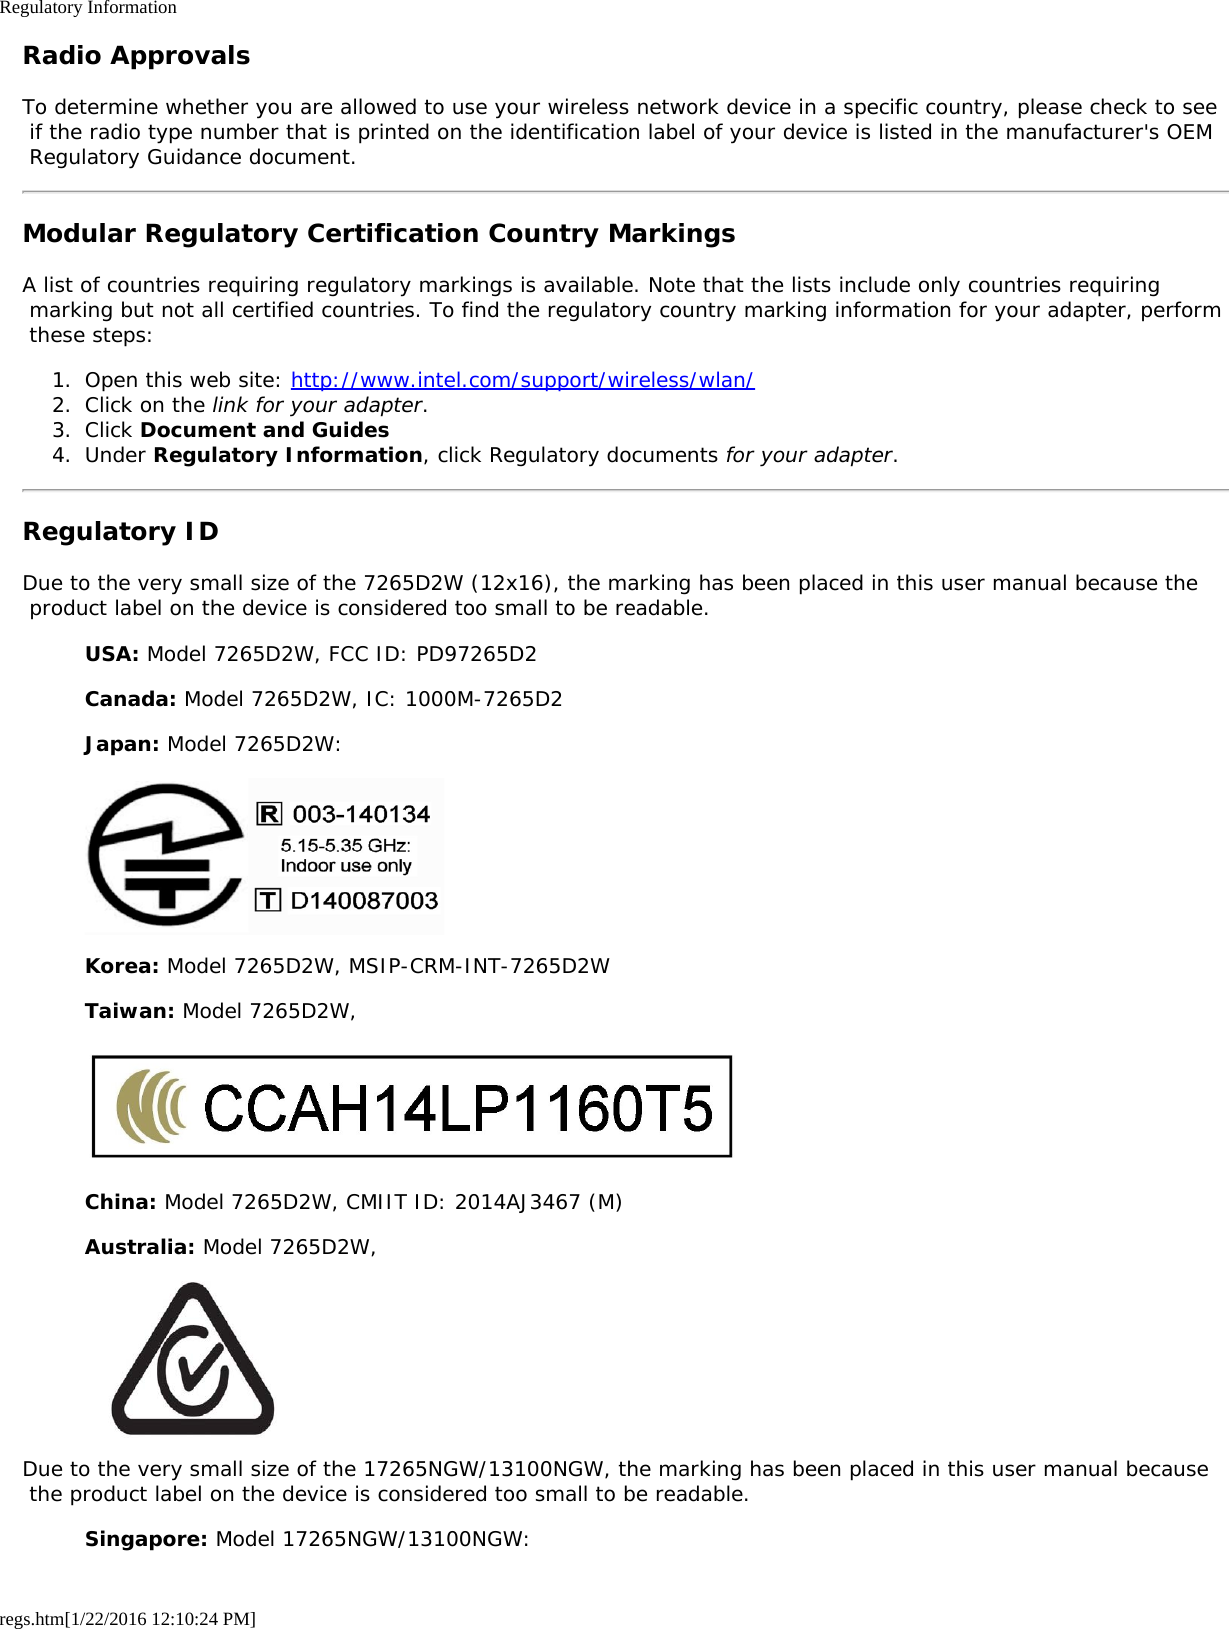 Regulatory Informationregs.htm[1/22/2016 12:10:24 PM]Radio ApprovalsTo determine whether you are allowed to use your wireless network device in a specific country, please check to see if the radio type number that is printed on the identification label of your device is listed in the manufacturer&apos;s OEM Regulatory Guidance document.Modular Regulatory Certification Country MarkingsA list of countries requiring regulatory markings is available. Note that the lists include only countries requiring marking but not all certified countries. To find the regulatory country marking information for your adapter, perform these steps:1.  Open this web site: http://www.intel.com/support/wireless/wlan/2.  Click on the link for your adapter.3.  Click Document and Guides4.  Under Regulatory Information, click Regulatory documents for your adapter.Regulatory IDDue to the very small size of the 7265D2W (12x16), the marking has been placed in this user manual because the product label on the device is considered too small to be readable.USA: Model 7265D2W, FCC ID: PD97265D2Canada: Model 7265D2W, IC: 1000M-7265D2Japan: Model 7265D2W:Korea: Model 7265D2W, MSIP-CRM-INT-7265D2WTaiwan: Model 7265D2W,China: Model 7265D2W, CMIIT ID: 2014AJ3467 (M)Australia: Model 7265D2W,Due to the very small size of the 17265NGW/13100NGW, the marking has been placed in this user manual because the product label on the device is considered too small to be readable.Singapore: Model 17265NGW/13100NGW: